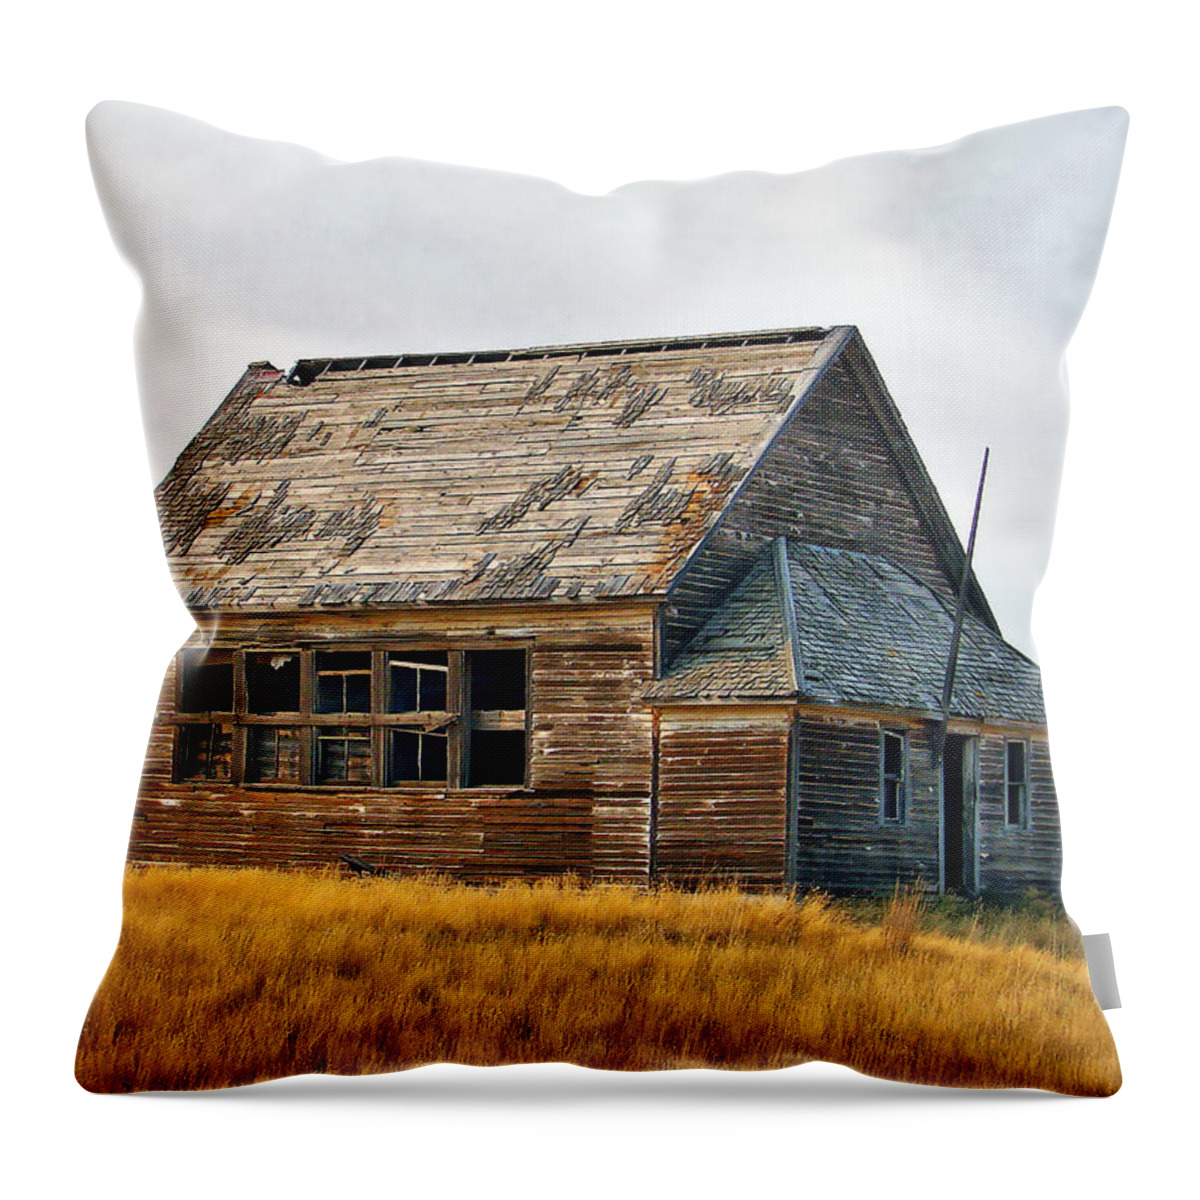 School Throw Pillow featuring the photograph Heritage by Blair Wainman